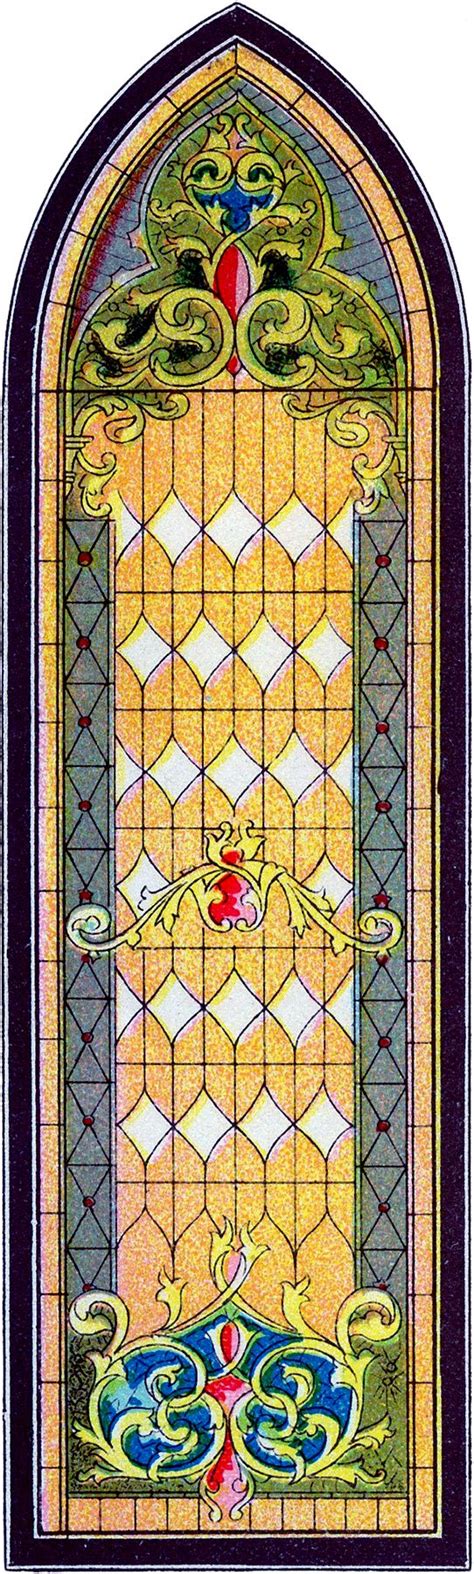 Vintage Stained Glass Church Window Image The Graphics Fairy Stained